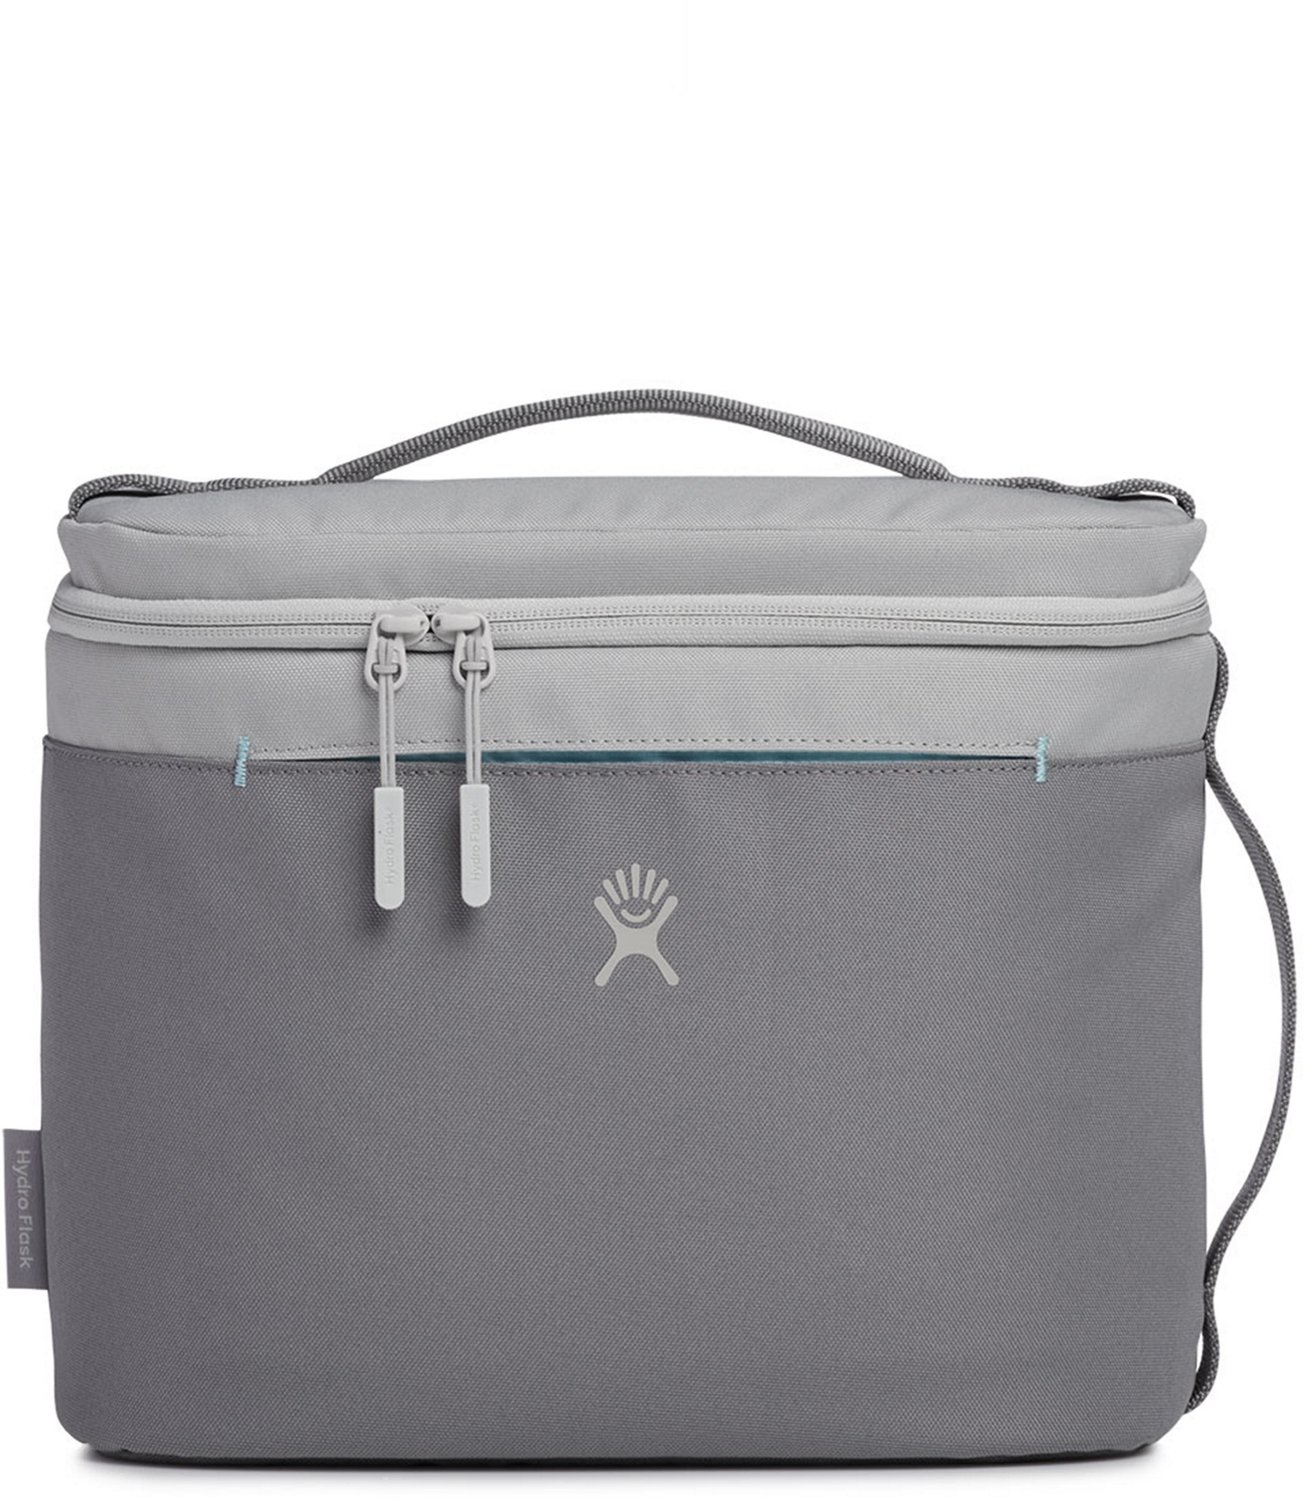 Hydro Flask 8L Insulated Lunch Bag | Free Shipping at Academy